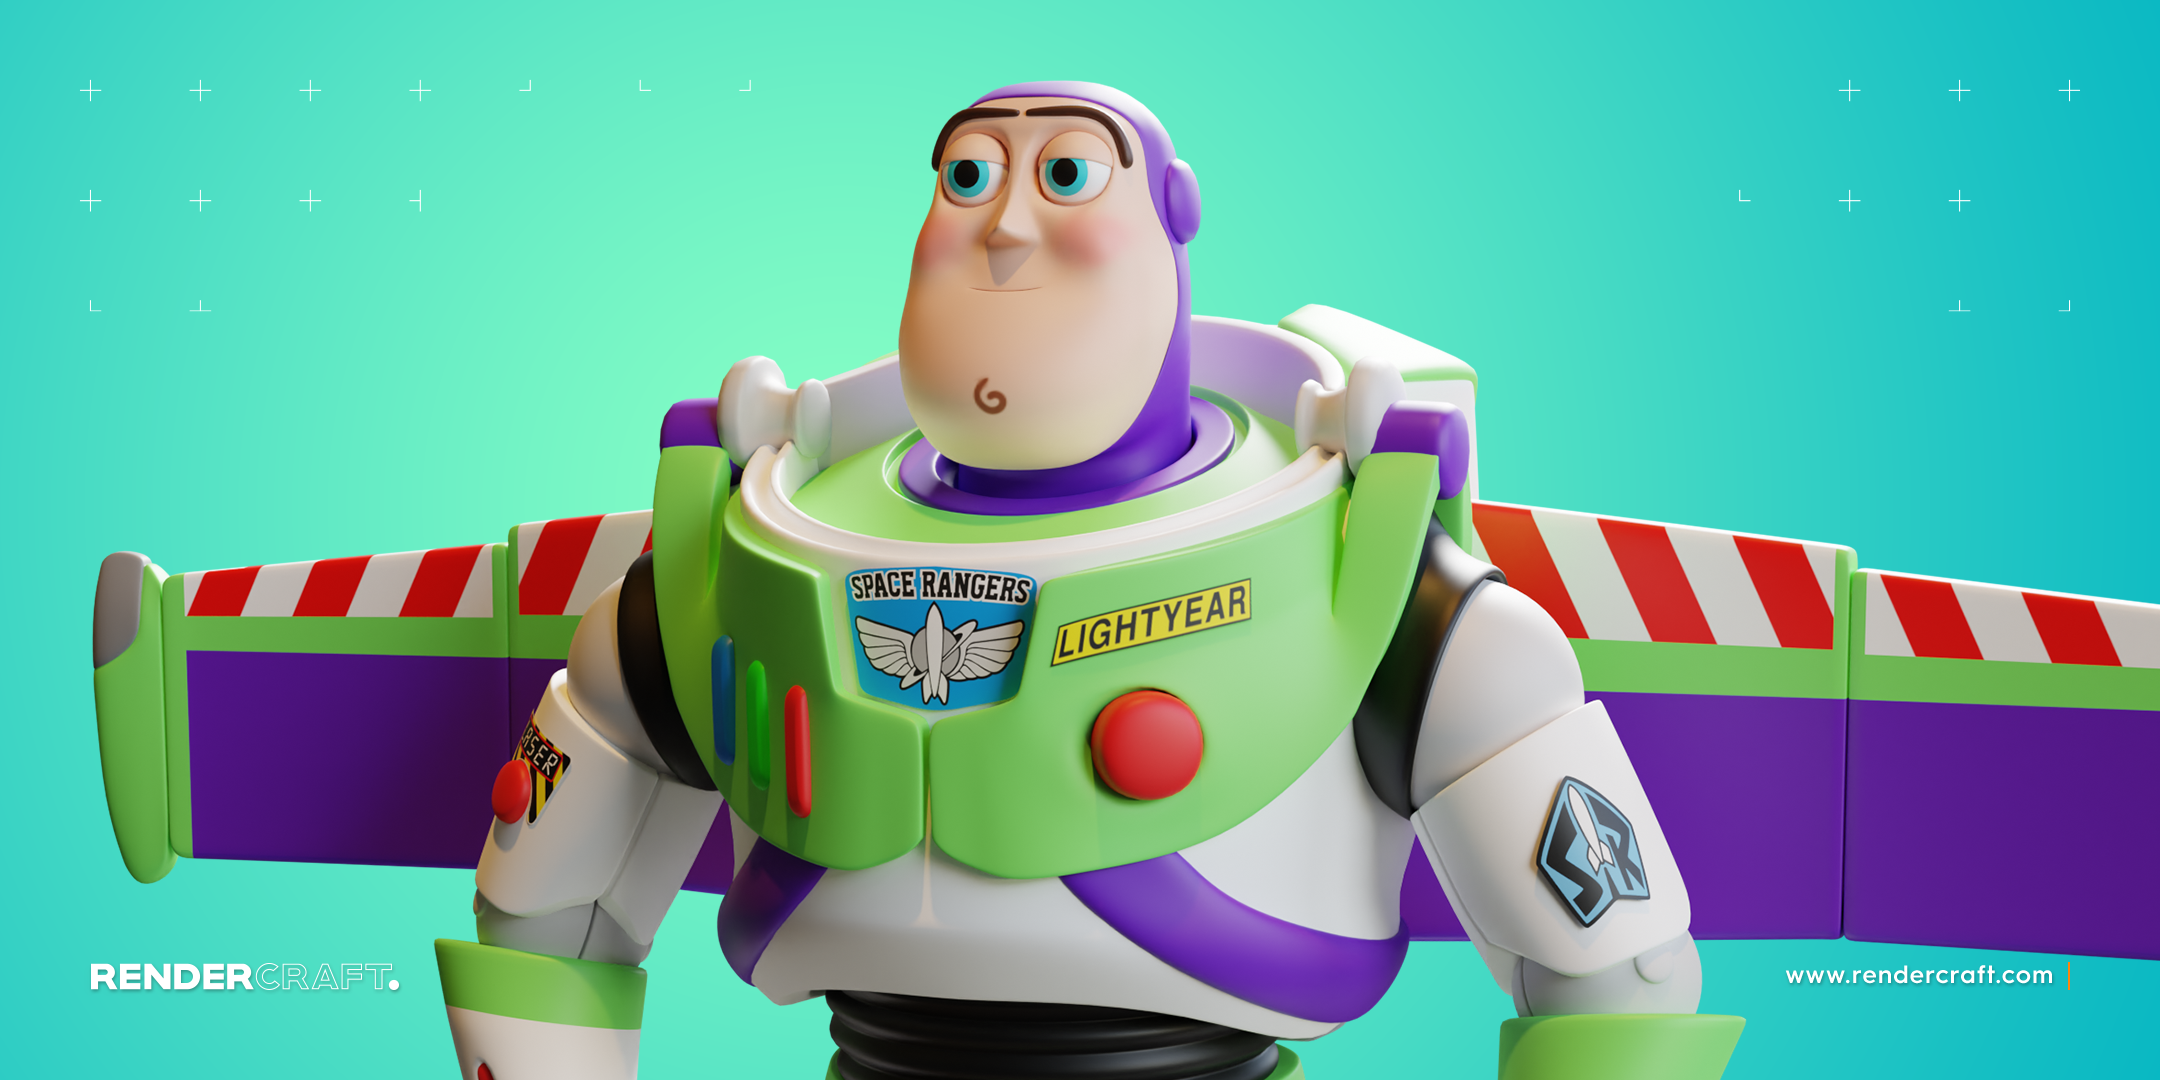 Create Toy Story Character Buzz Lightyear Blender Academy Course